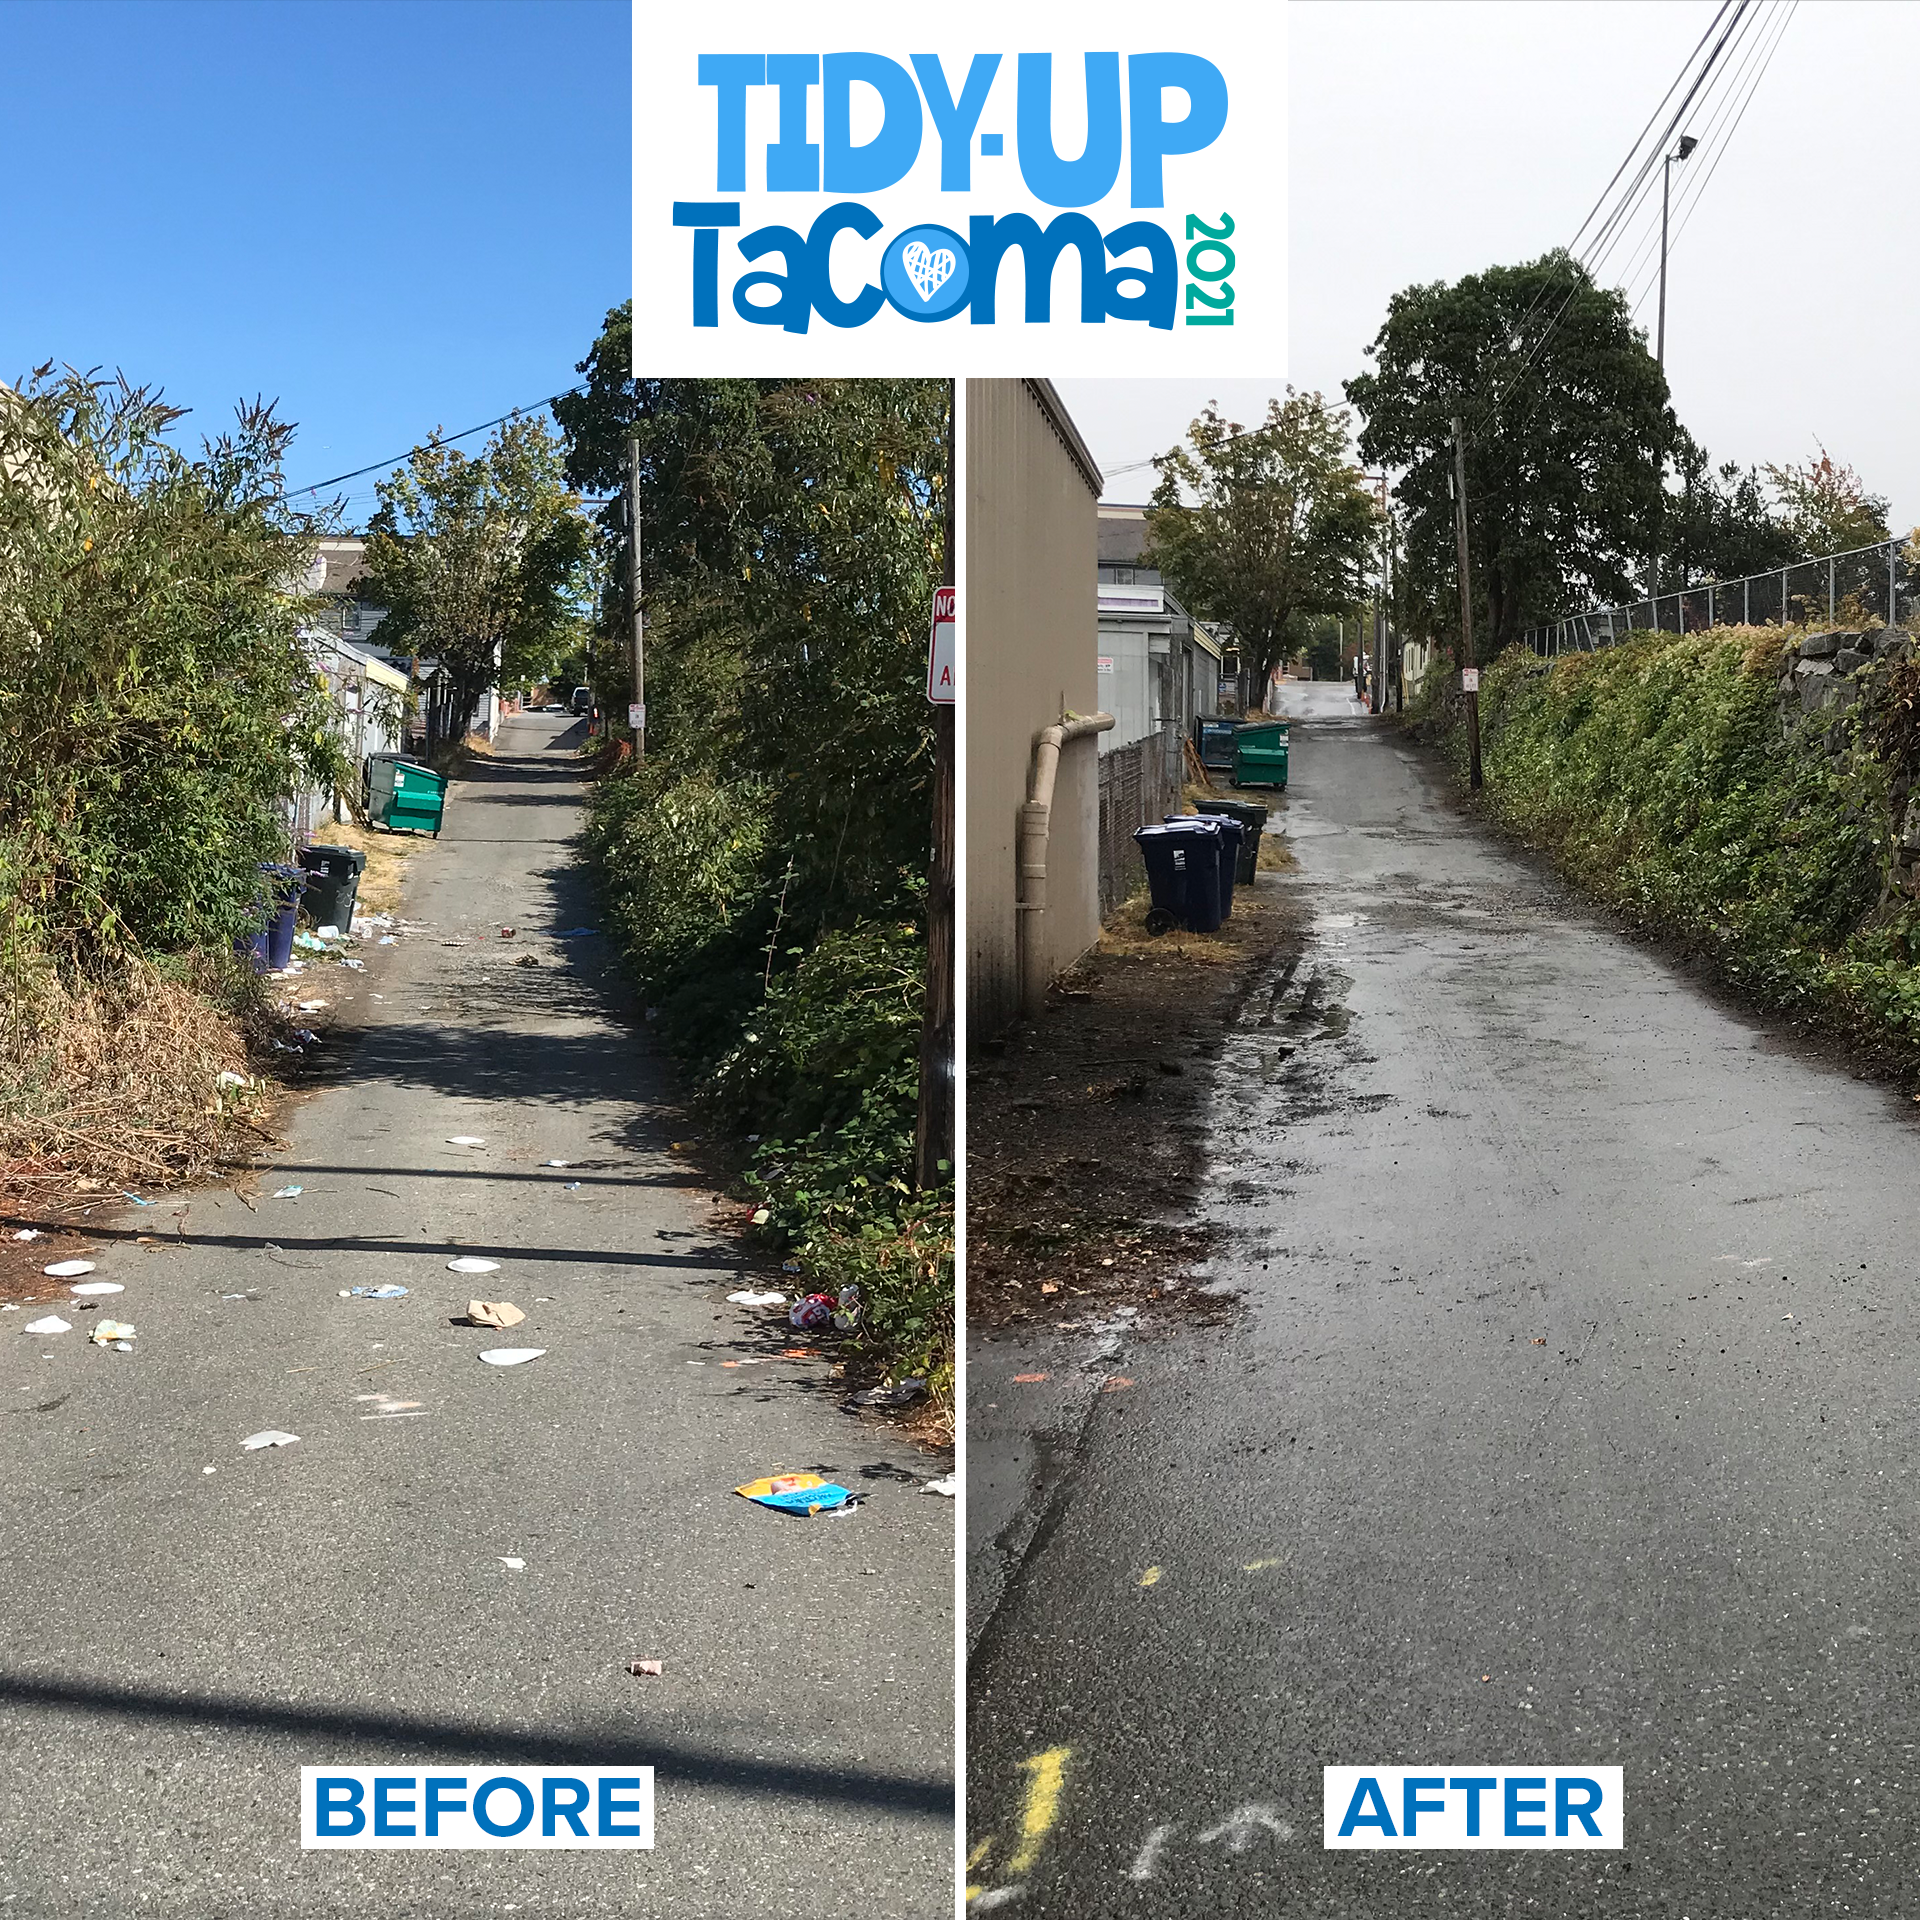 Before and after photos of Tidy-Up Tacoma initiative